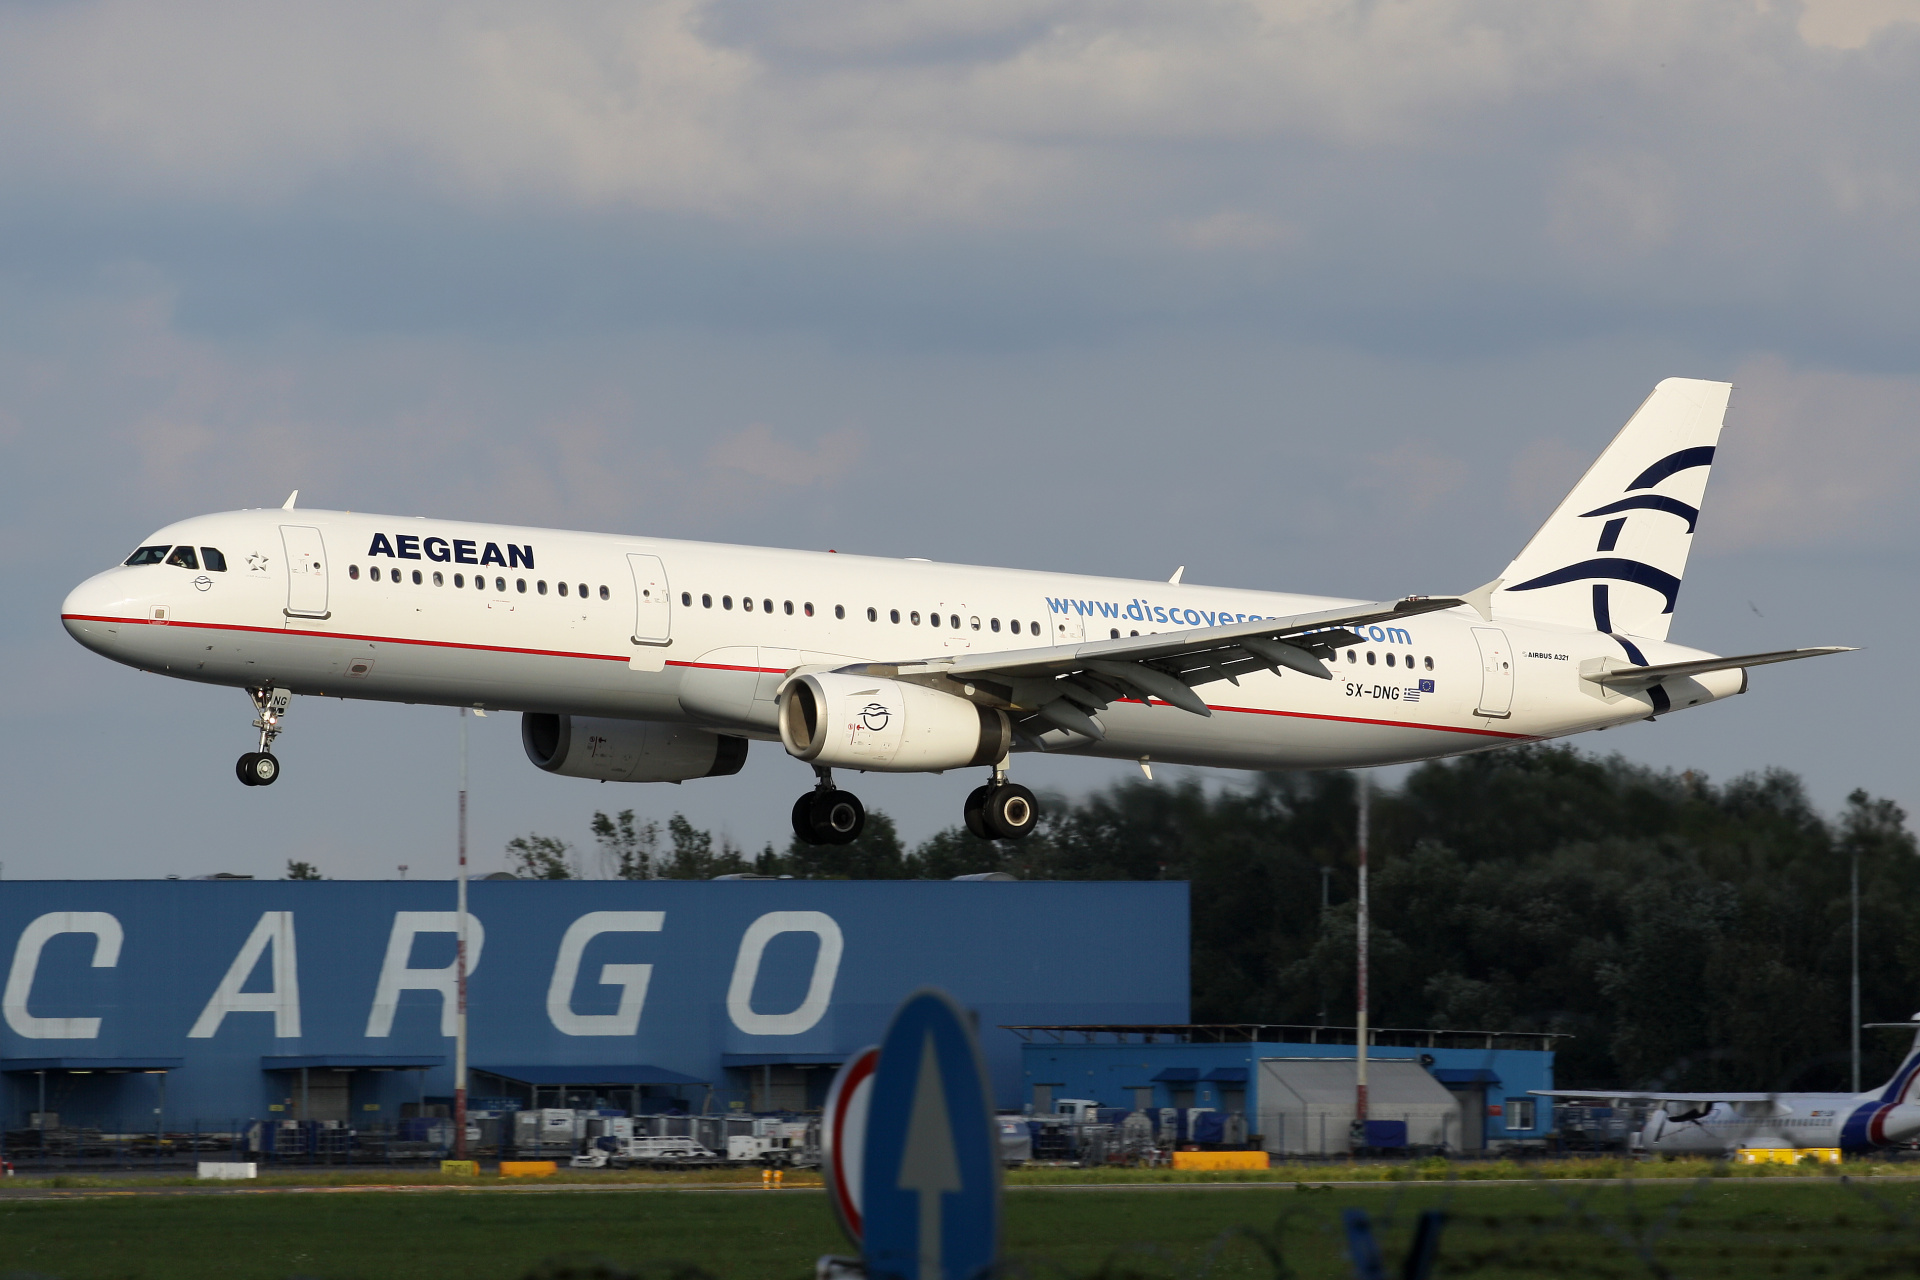 SX-DNG, Aegean Airlines (discovergreece.com livery) (Aircraft » EPWA Spotting » Airbus A321-200)